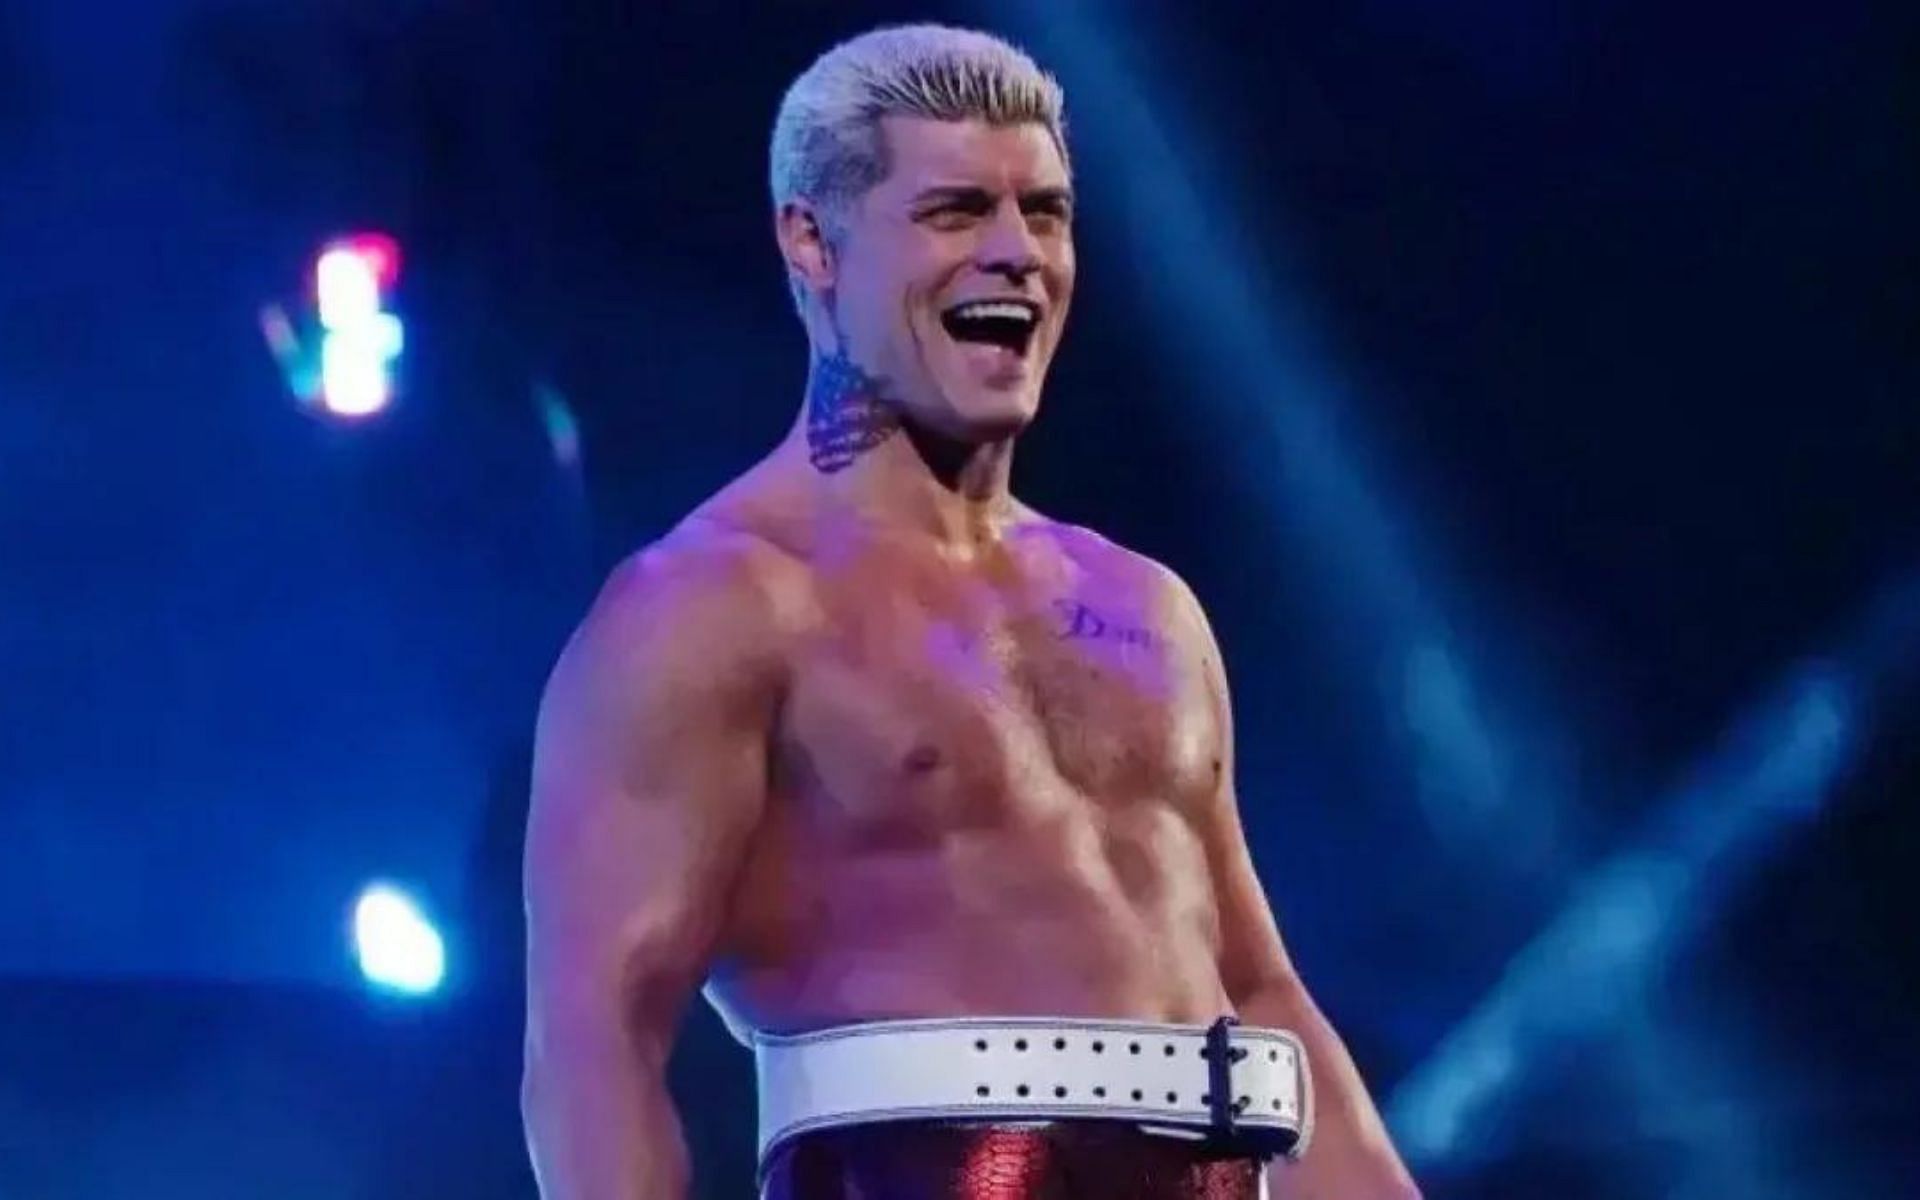 Cody Rhodes won his first Royal Rumble match this year